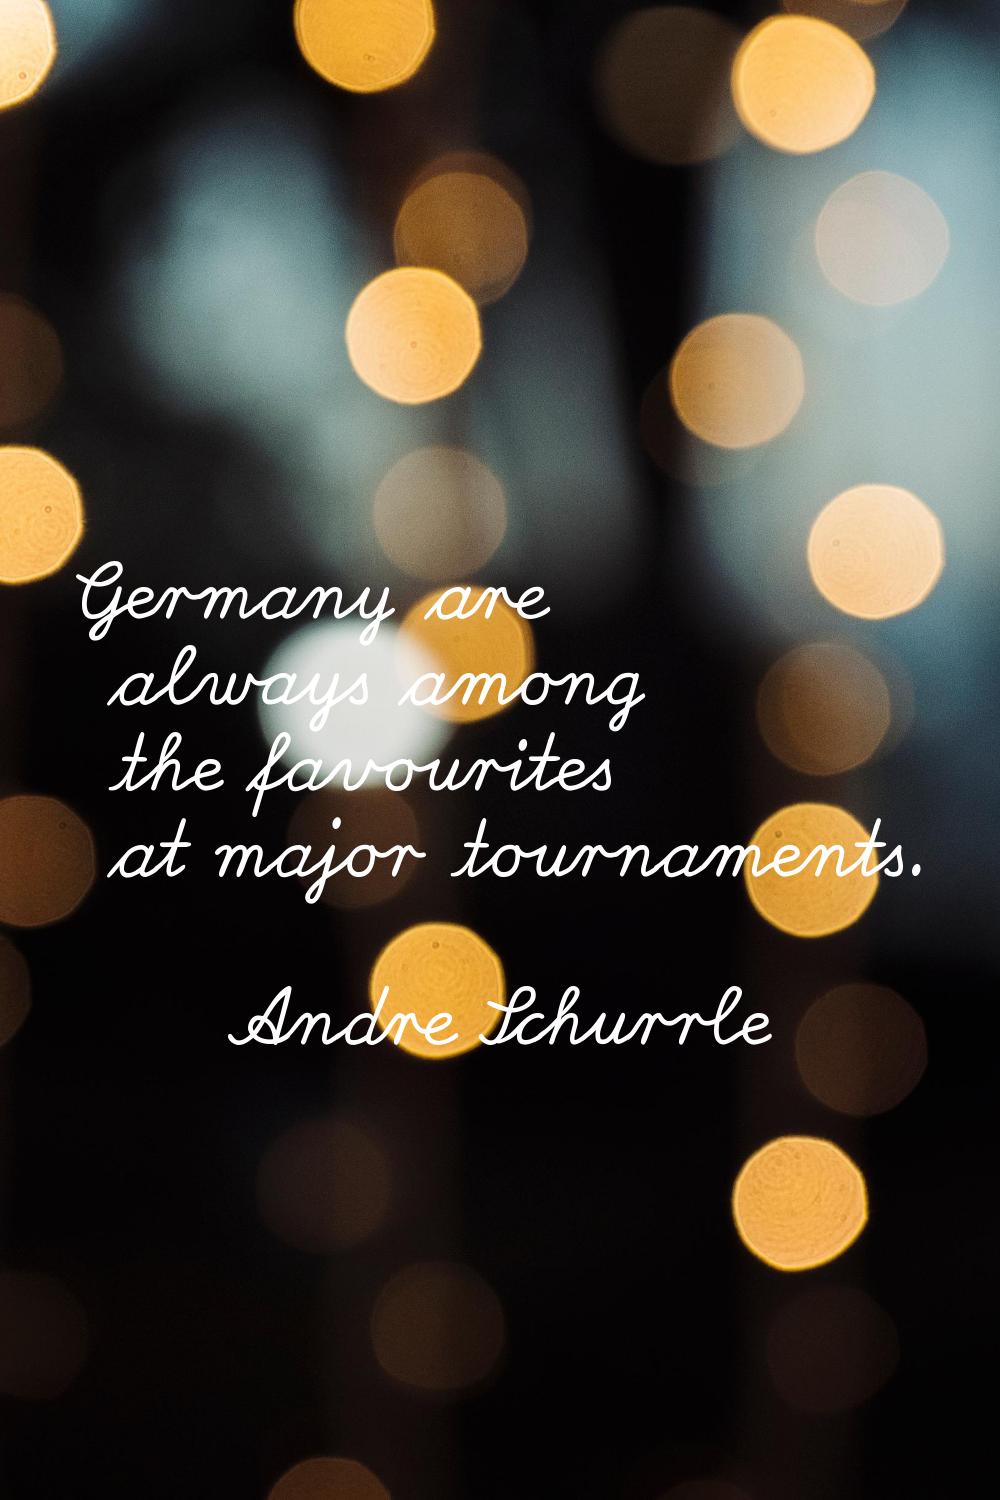 Germany are always among the favourites at major tournaments.